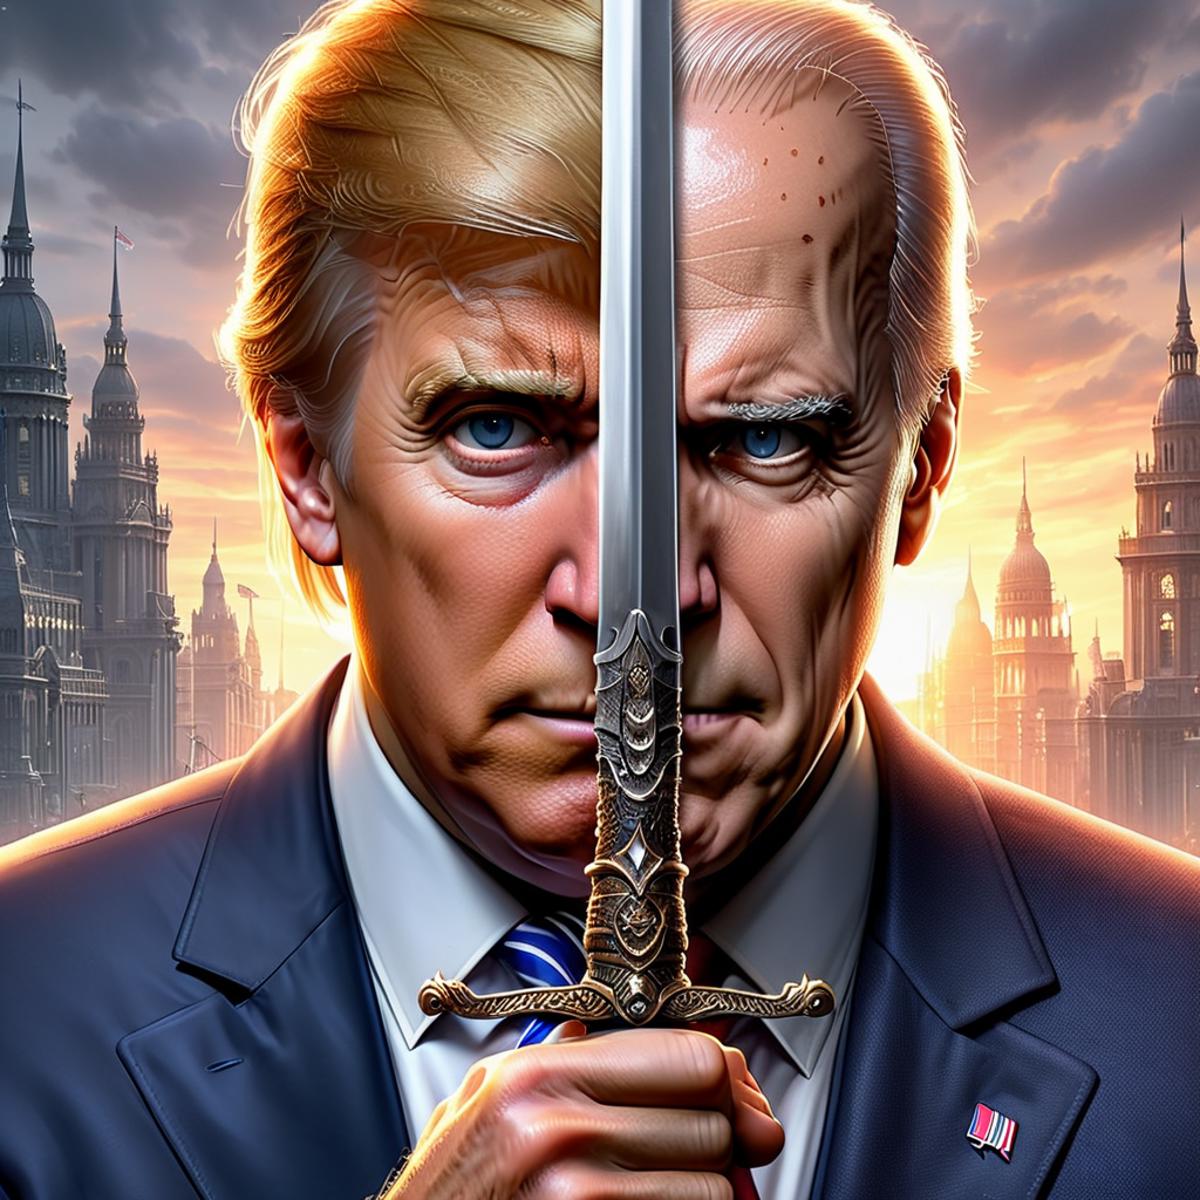 Trump and Biden in a Graphic, with Trump Holding a Sword and Biden Looking Angry